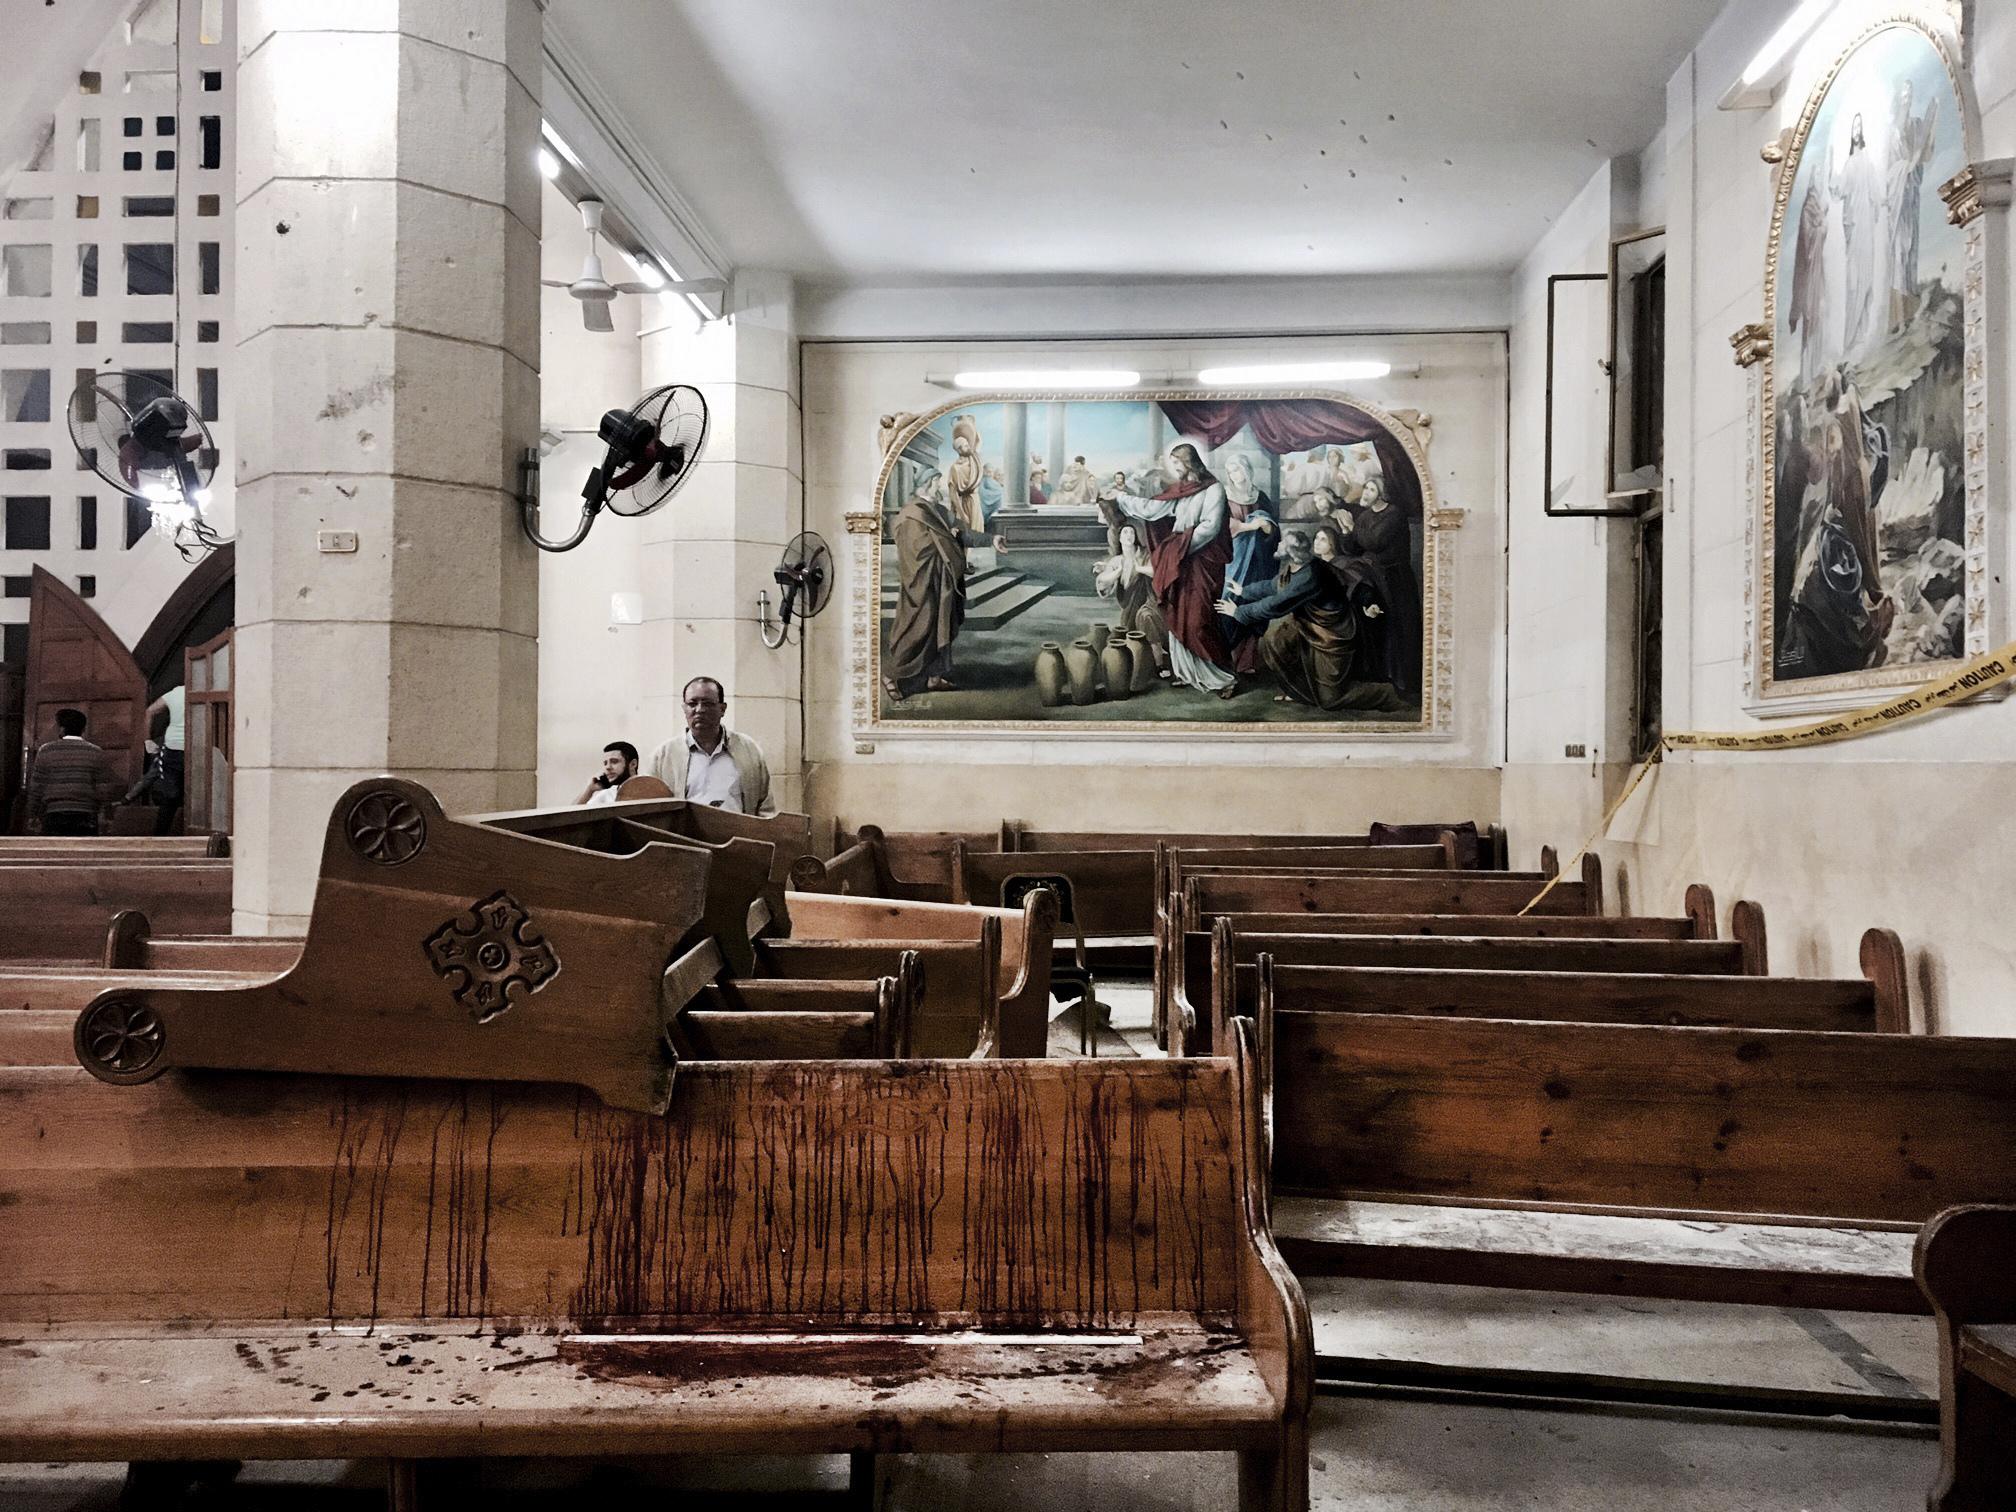  Blood stains pews inside the St. George Church after a suicide bombing, in the Nile Delta town of Tanta, April 9, 2017. Bombs exploded at two Coptic churches in the northern Egyptian cities of Tanta and Alexandria as worshippers were celebrating Palm Sunday, killing over 40 people and wounding scores more in assaults claimed by the Islamic State group.&nbsp; (iPhone Photo - security refused access) 